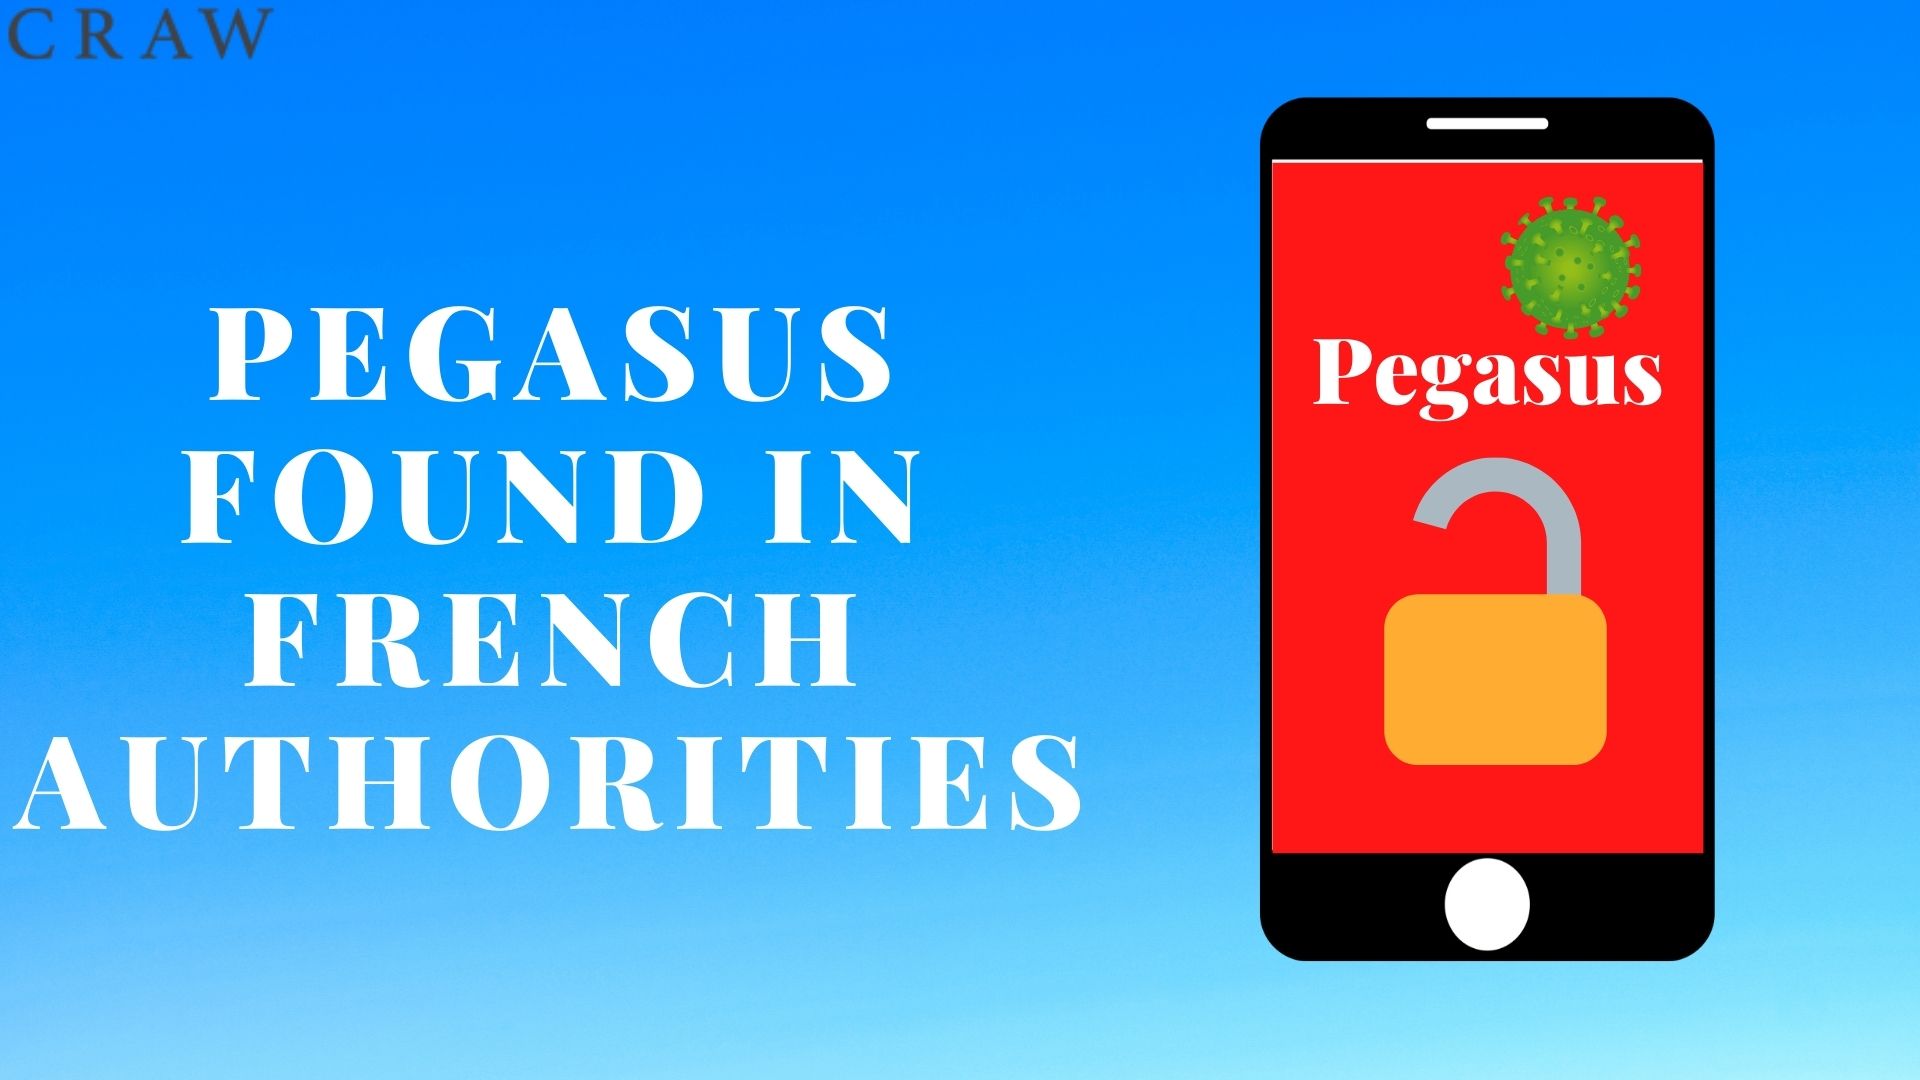 Pegasus found in French authorities